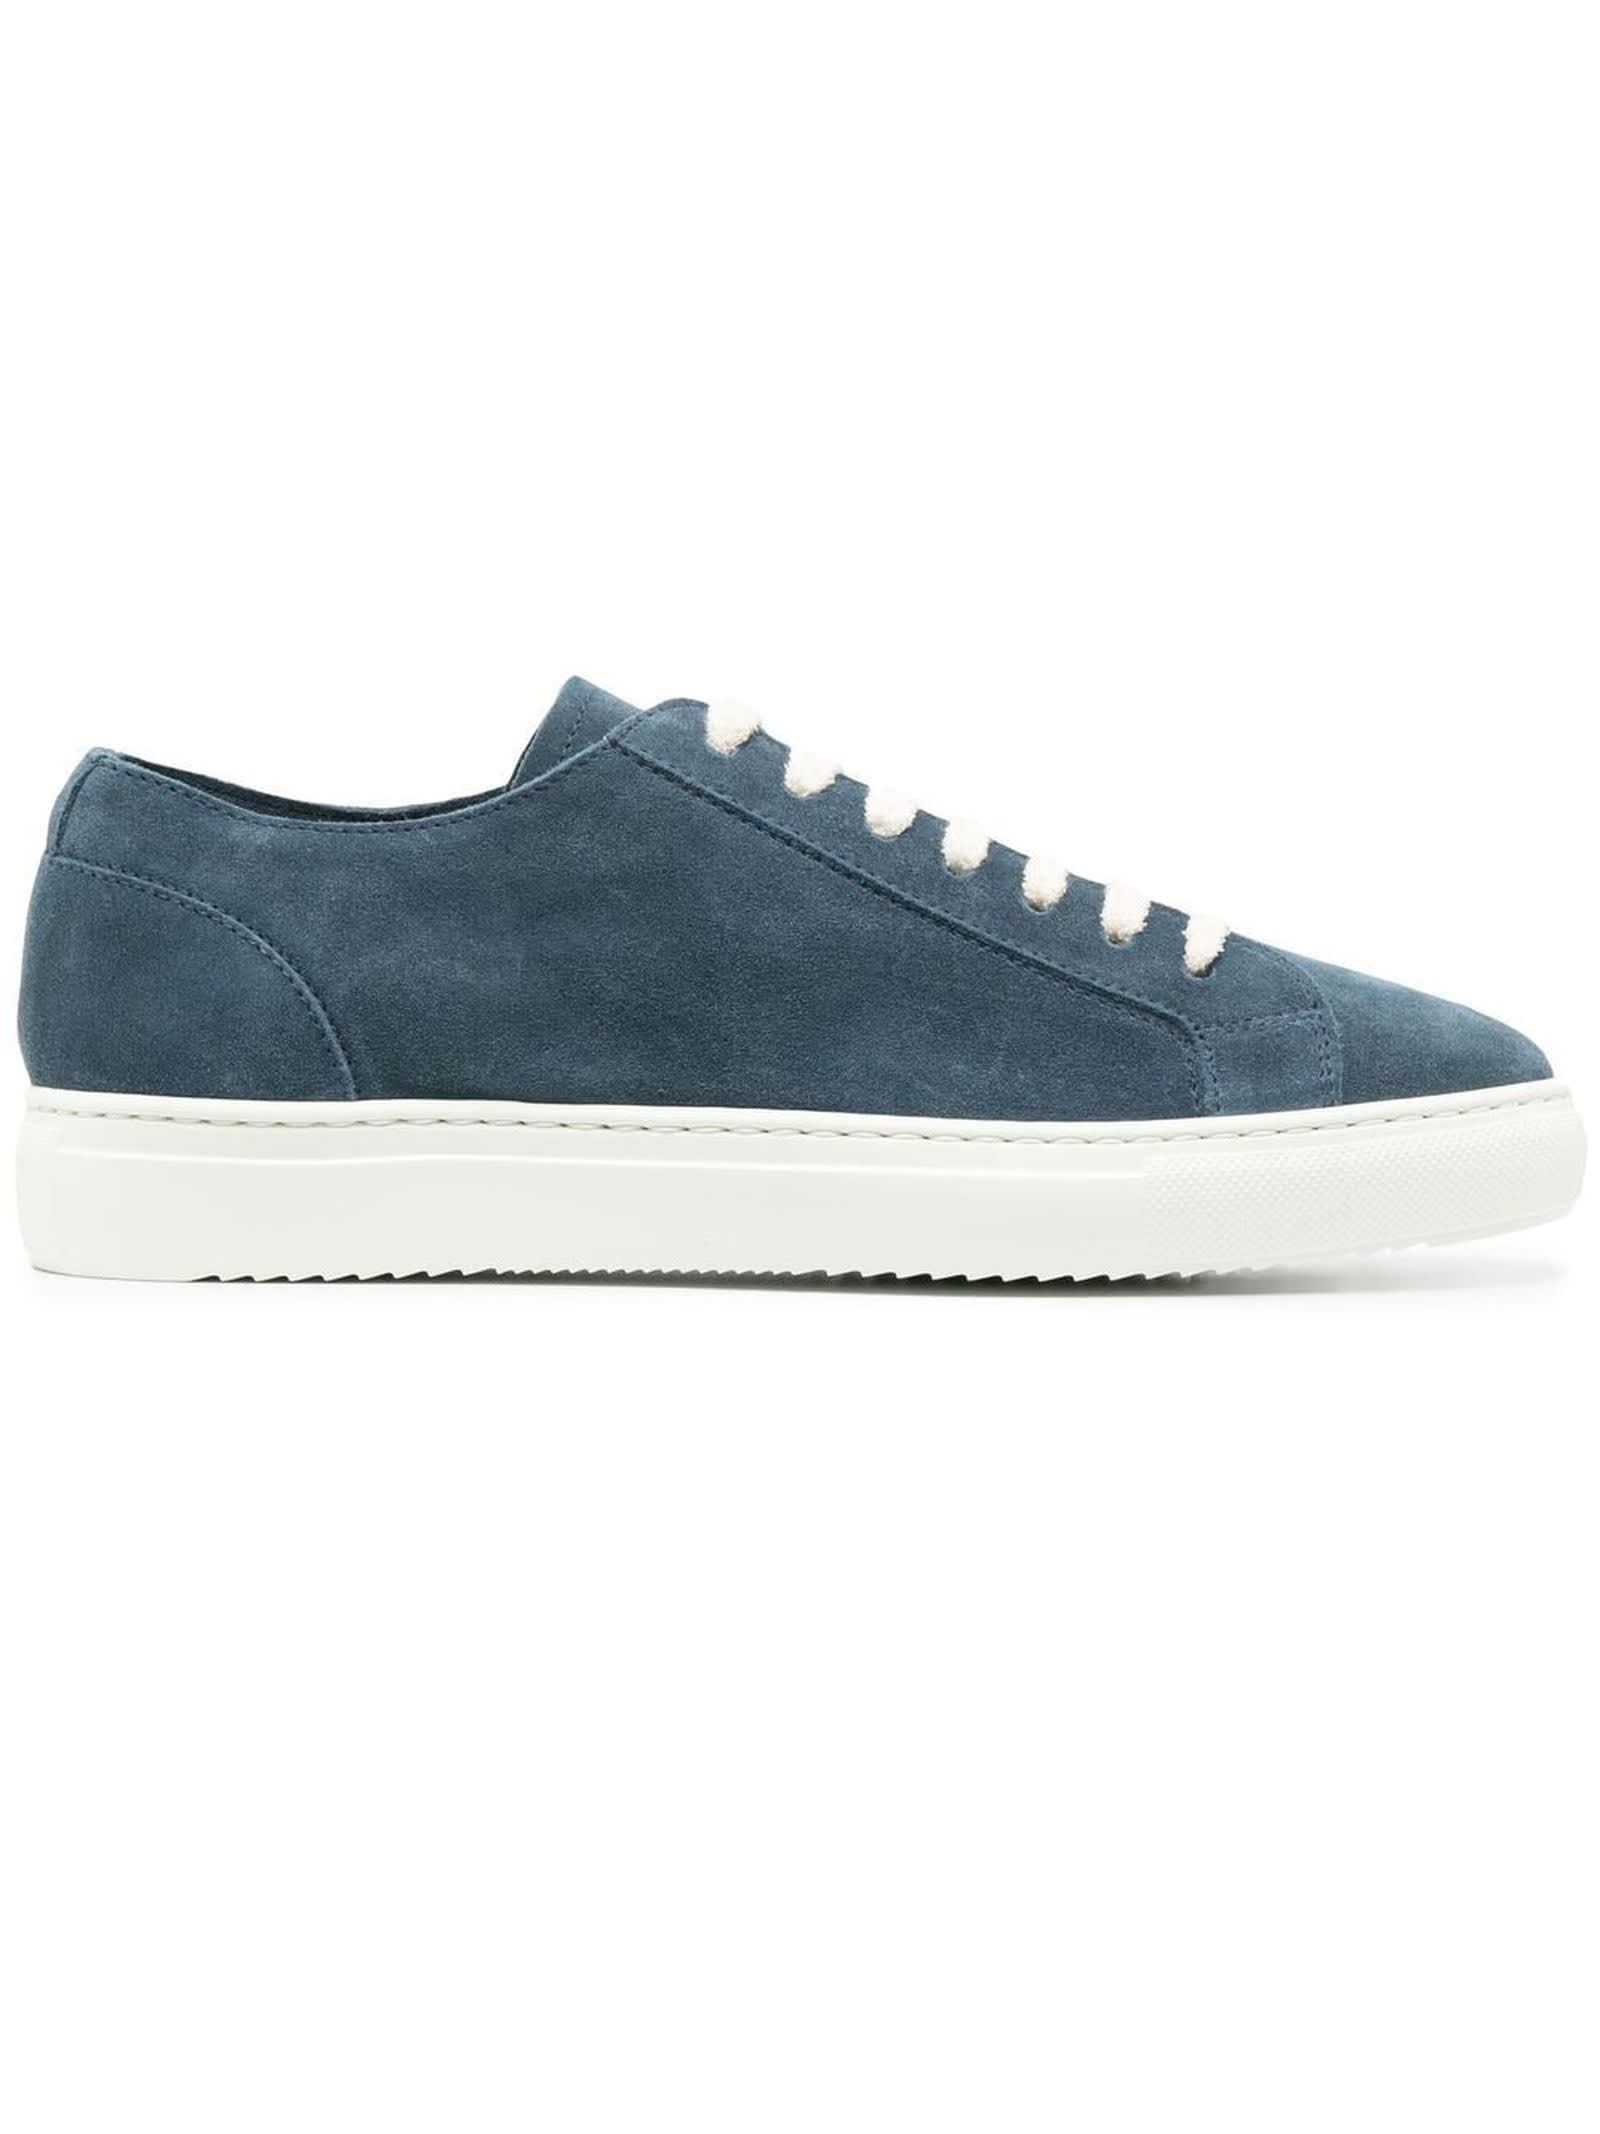 Doucal's Blue Suede Sneakers